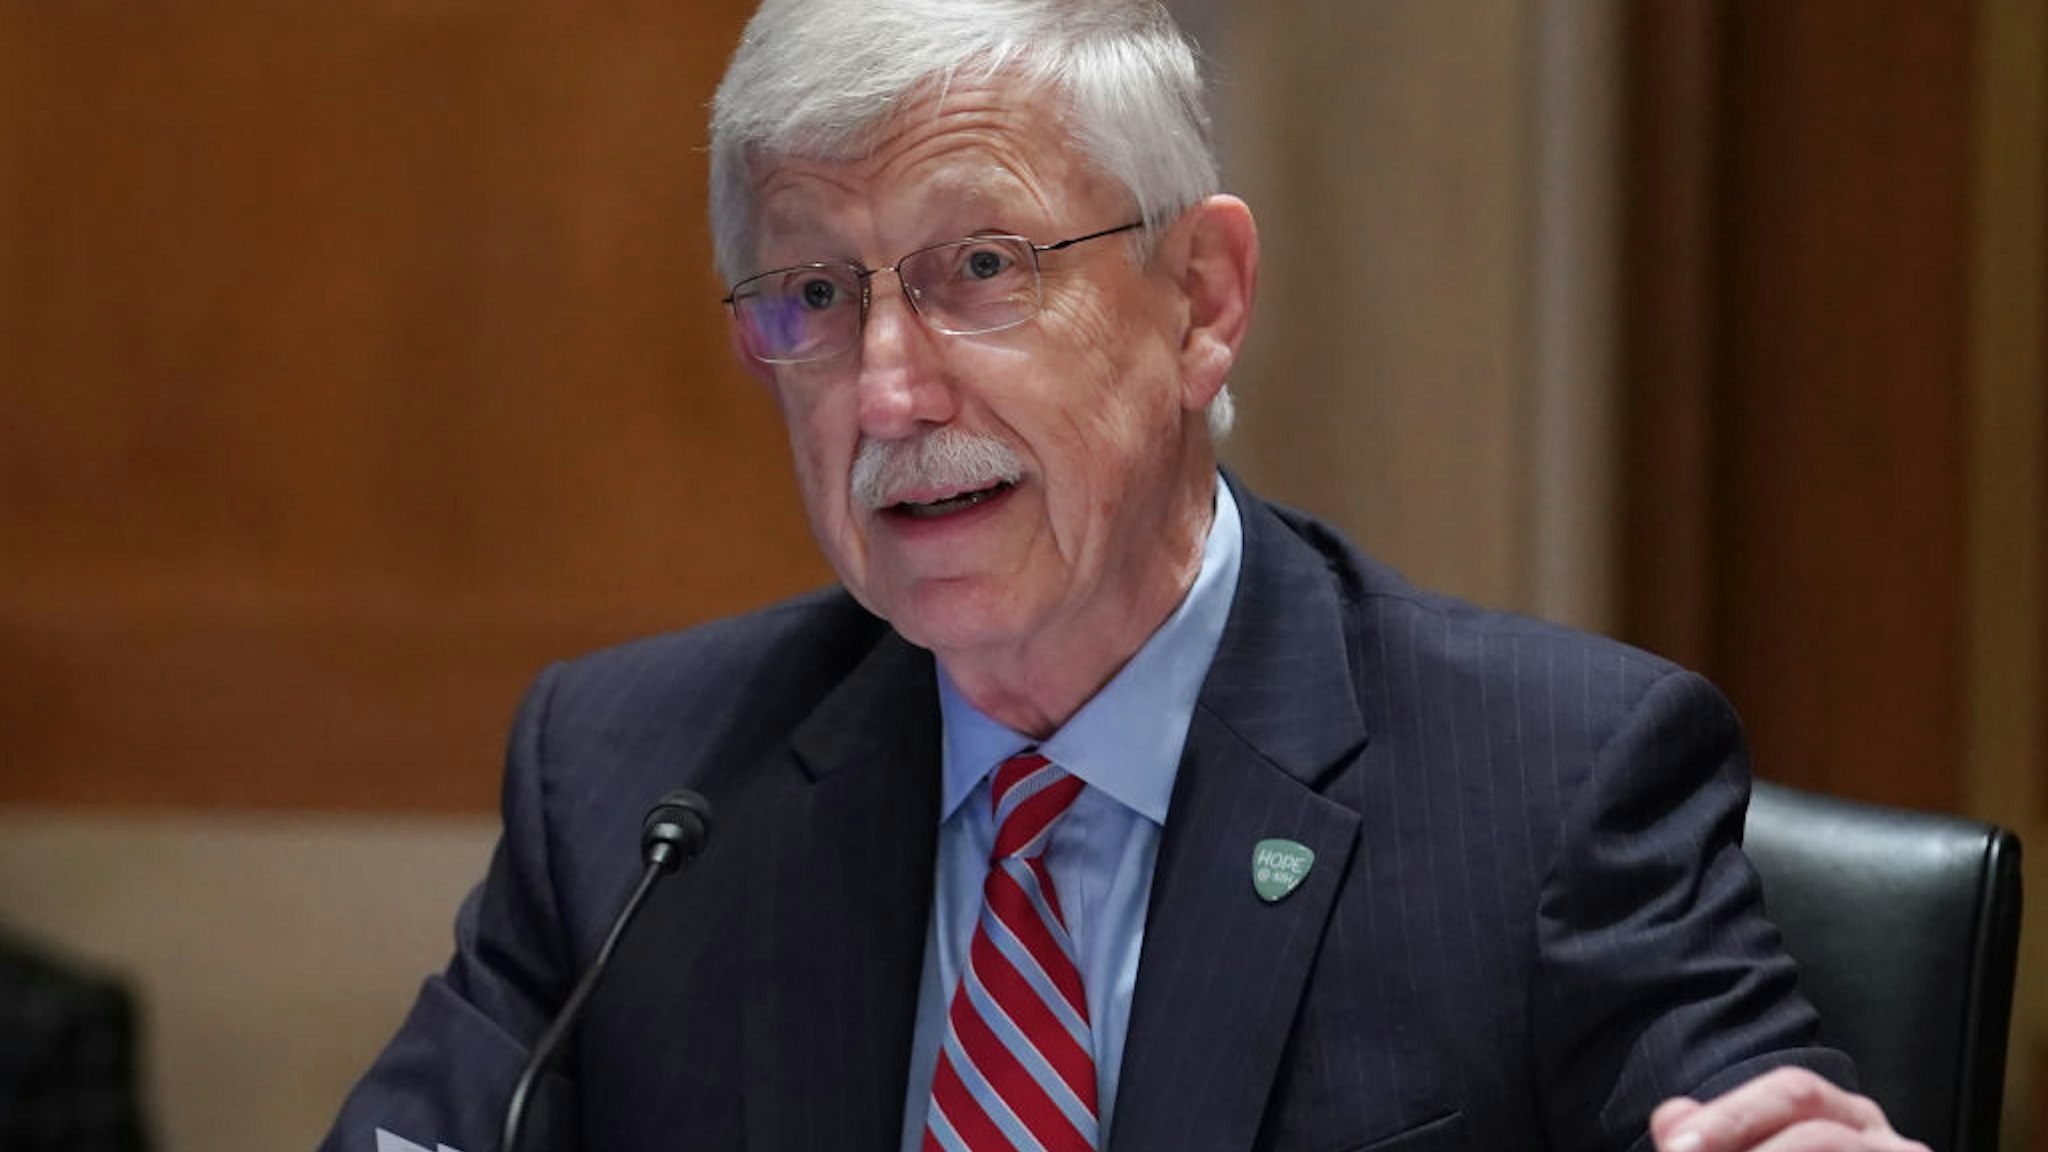 WASHINGTON, DC - MAY 26: National Institutes of Health Director Dr. Francis Collins testify before a Senate Appropriations Subcommittee looking into the budget estimates for National Institute of Health (NIH) and the state of medical research on Capitol Hill, May 26, 2021 in Washington, DC. (Photo by Sarah Silbiger-Pool/Getty Images)